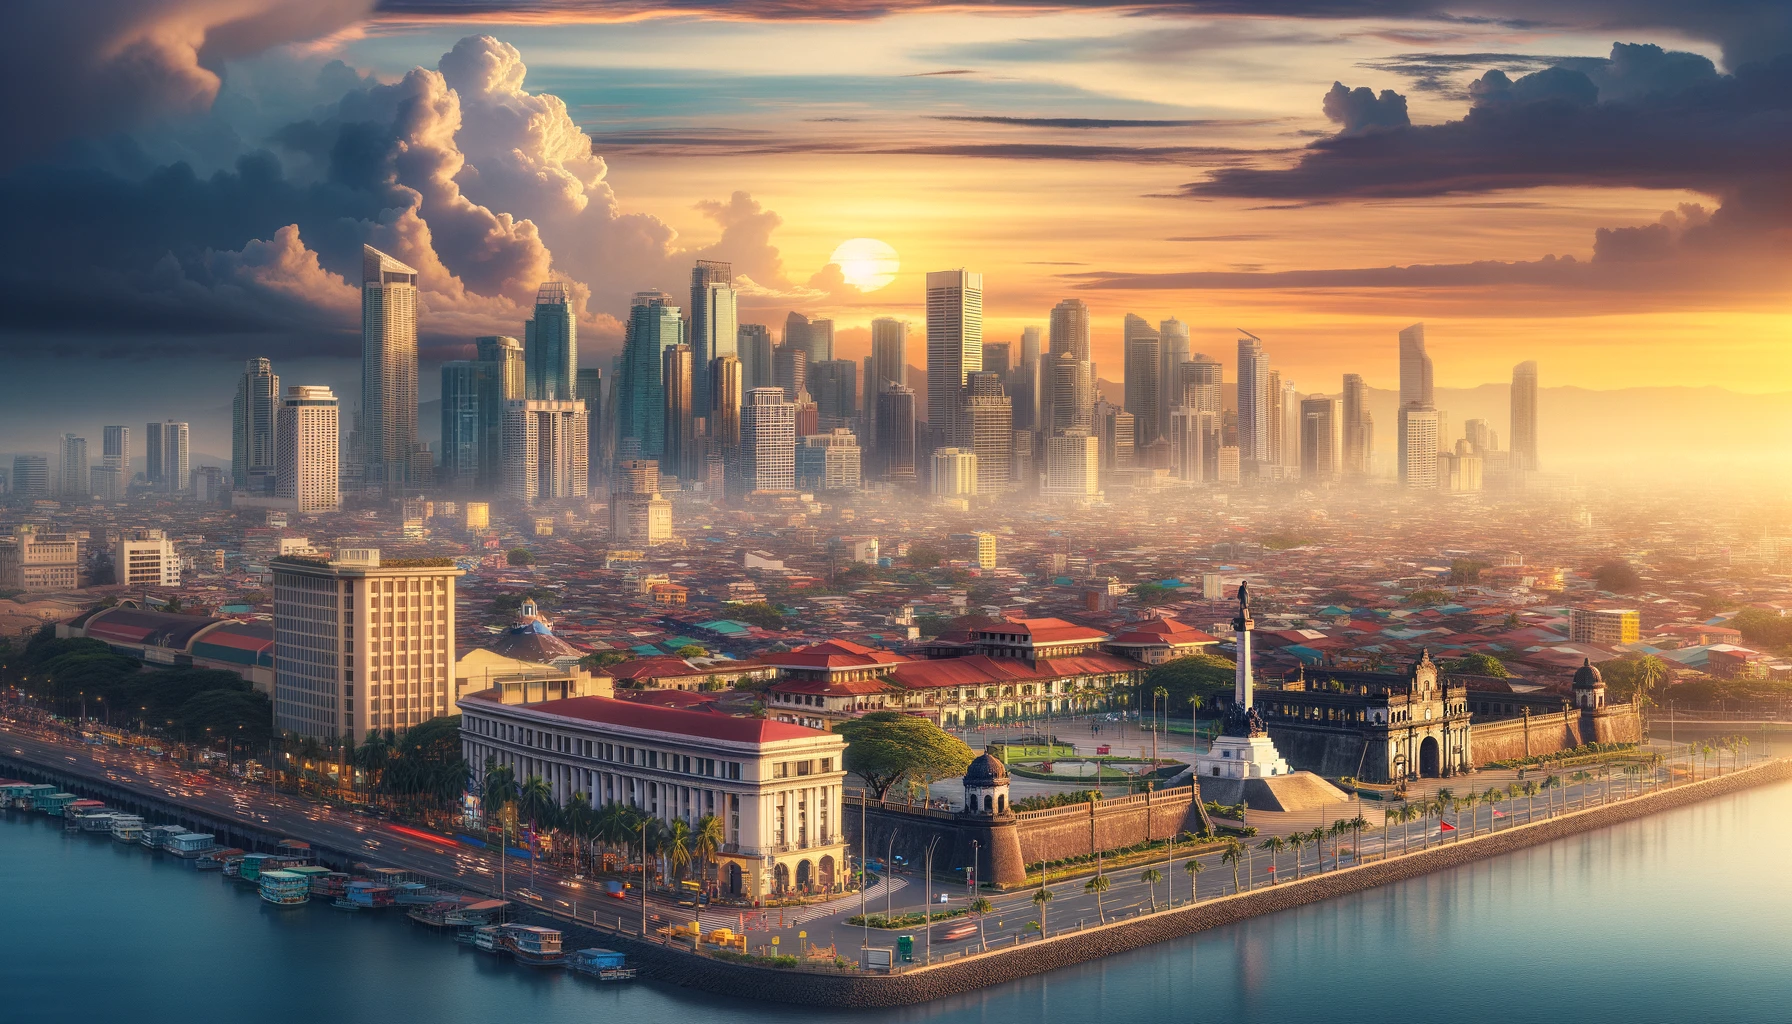 <p>The capital of the Philippines, Manila, is a bustling metropolis offering an affordable lifestyle. The cost of living is low, especially when it comes to rent and local food. The city’s vibrant culture and friendly locals make it an attractive destination for those on a budget.</p>